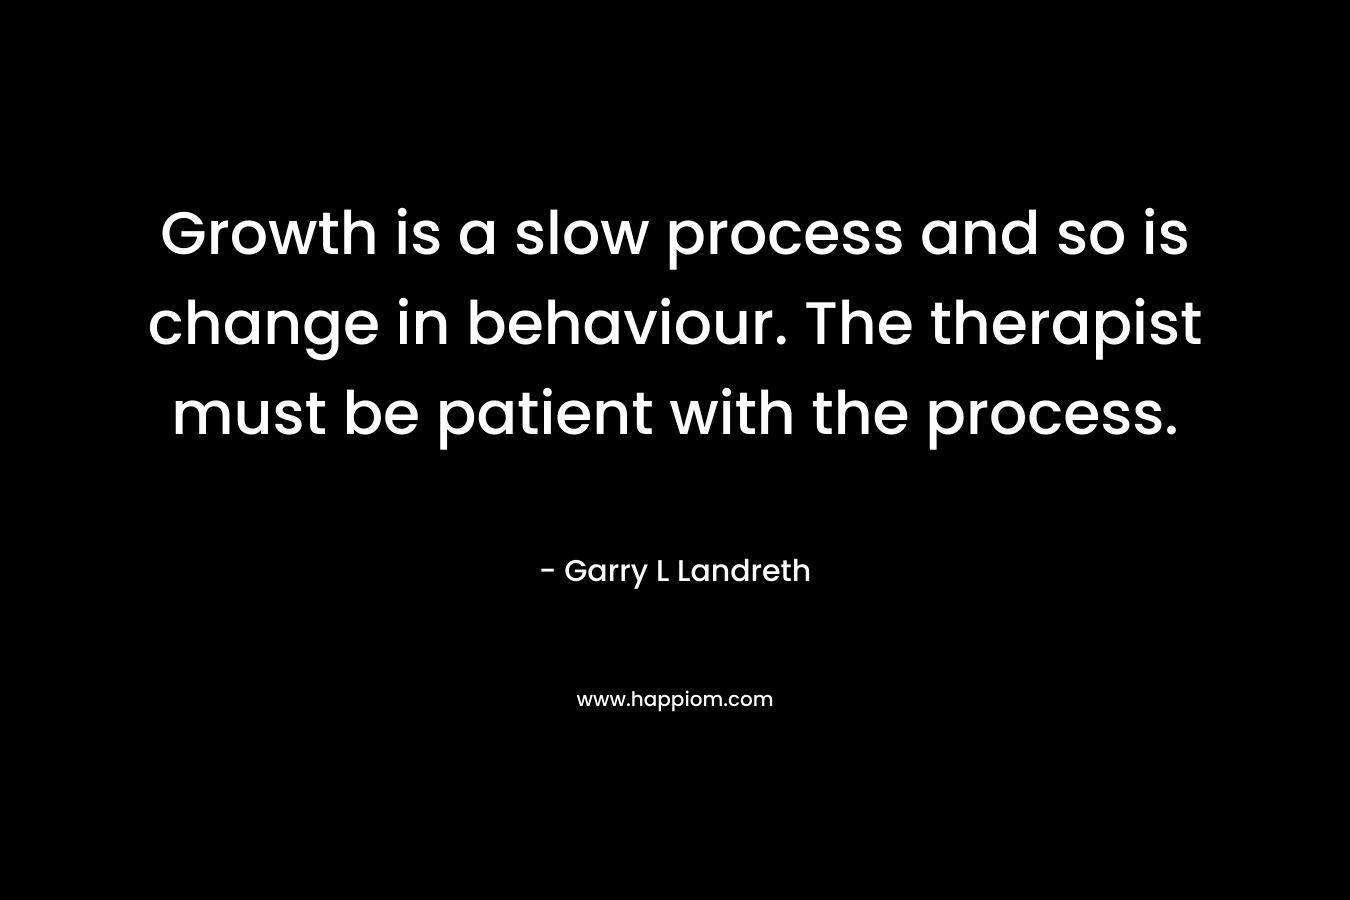 Growth is a slow process and so is change in behaviour. The therapist must be patient with the process. – Garry L Landreth